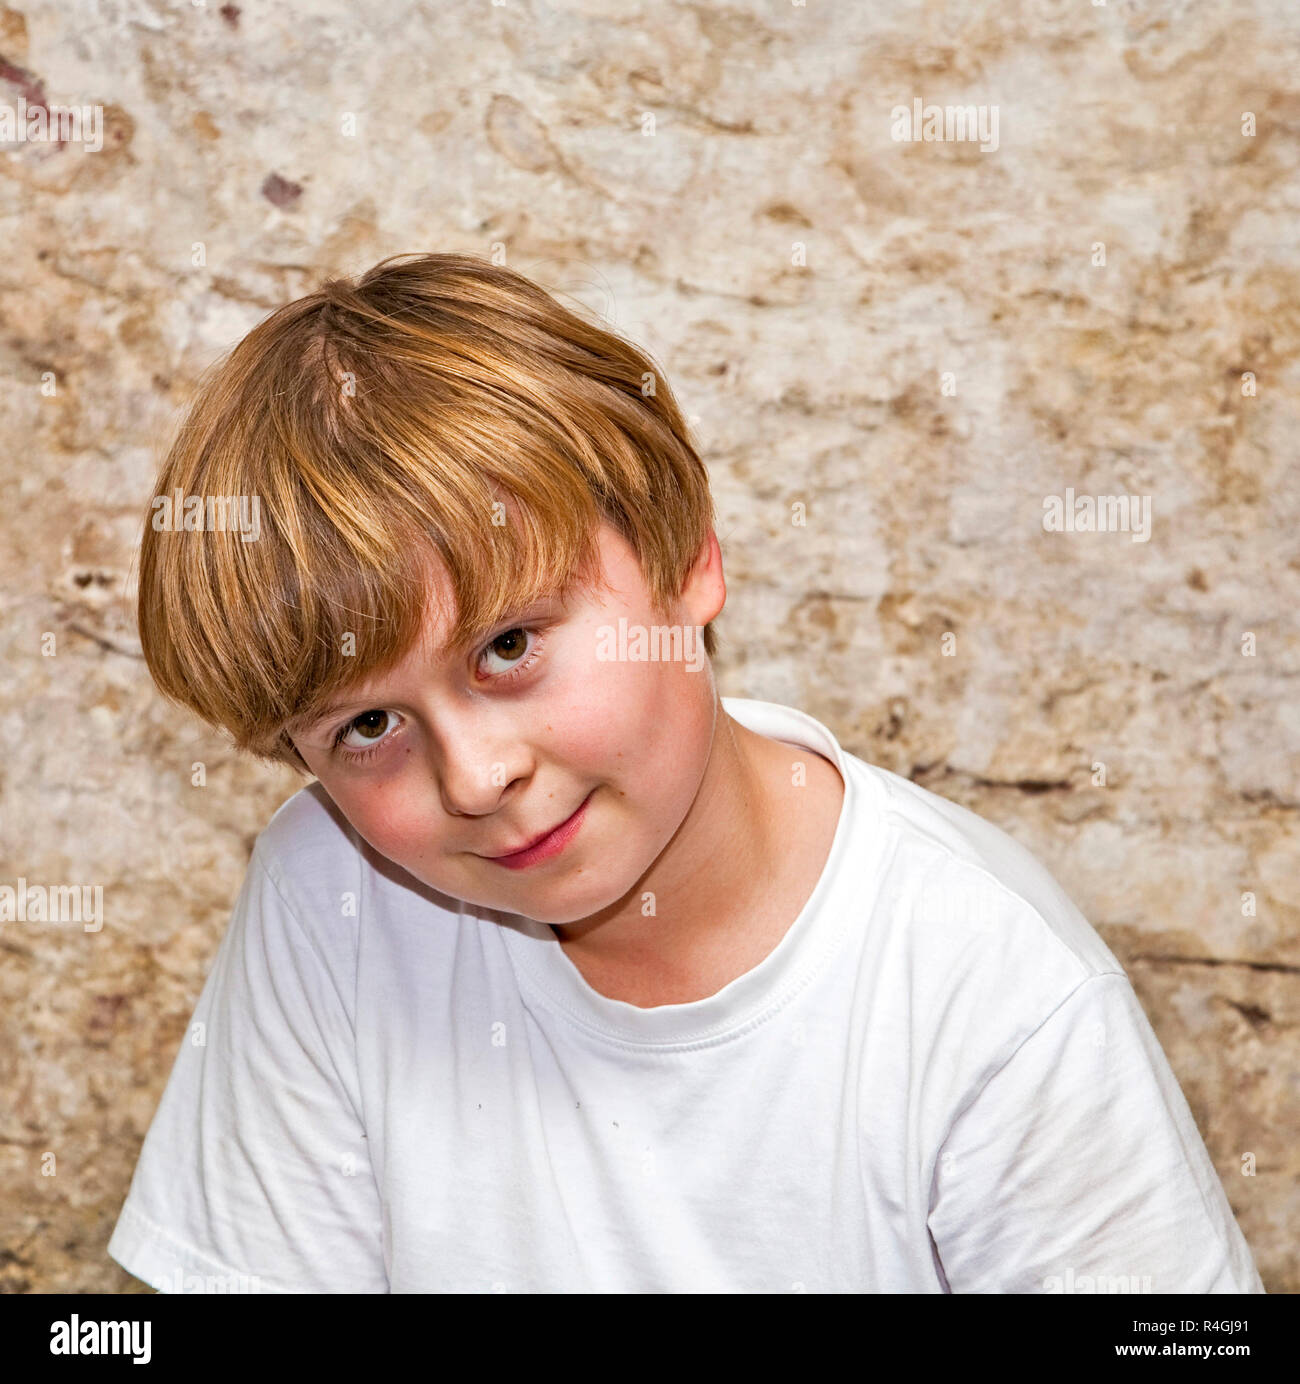 Boy With Light Brown Hair And Brown Eyes Lookes Friendly Stock